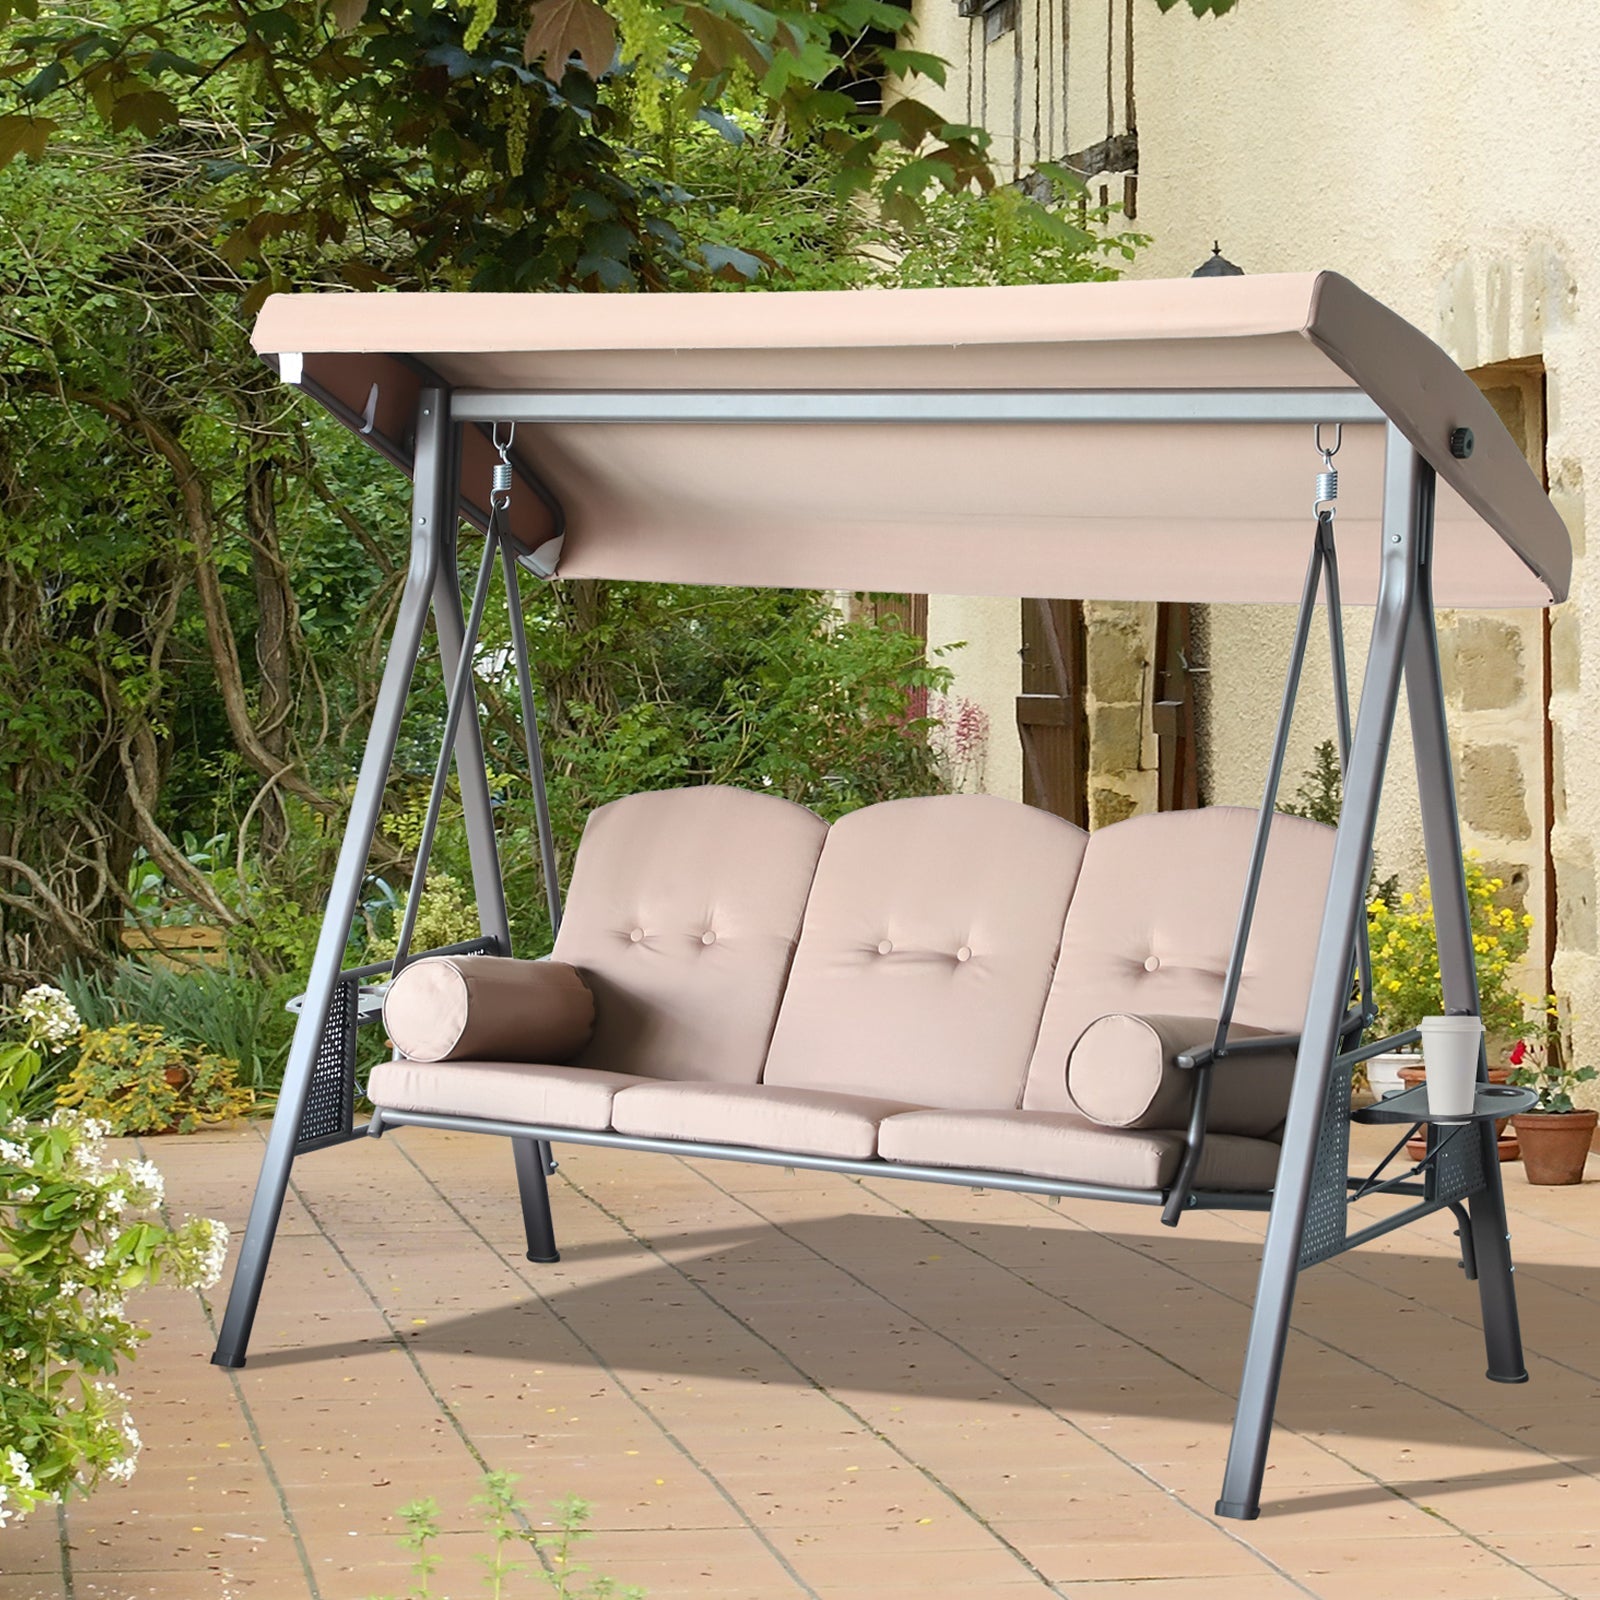 Outdoor Patio 3-Person Steel Canopy Cushioned Seat Bench Swing with Included Side Trays & Padded Comfort, Brown